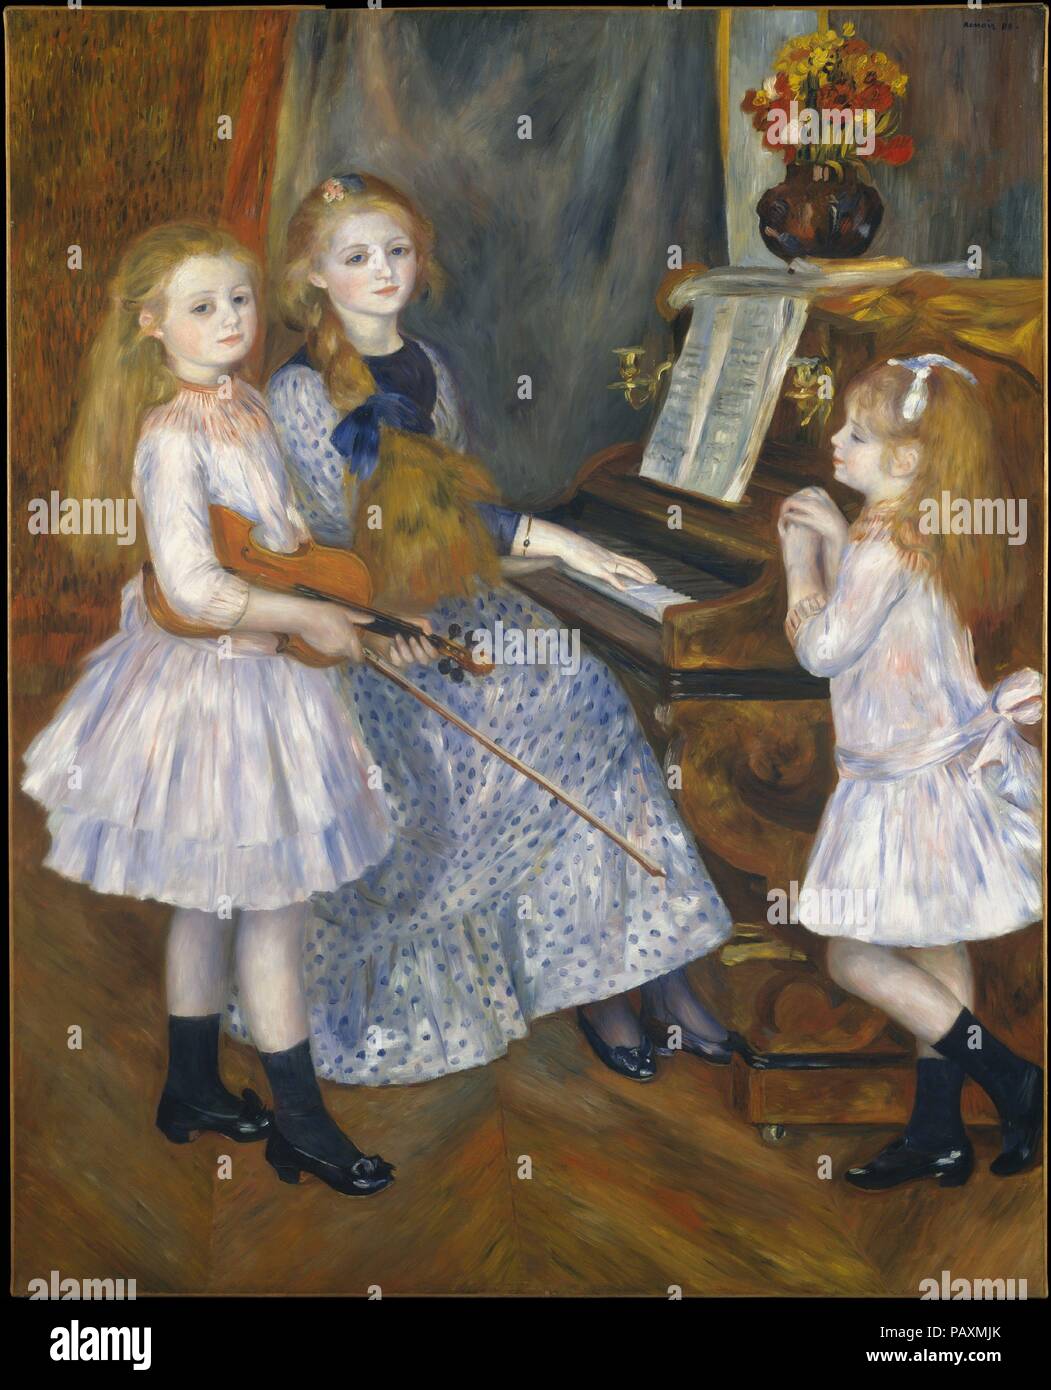 The Daughters of Catulle Mendès, Huguette (1871-1964), Claudine (1876-1937), and Helyonne (1879-1955). Artist: Auguste Renoir (French, Limoges 1841-1919 Cagnes-sur-Mer). Dimensions: 63 3/4 x 51 1/8 in. (161.9 x 129.9 cm). Date: 1888.  Hoping to recapture the success he had achieved with <i>Madame Georges Charpentier and Her Children</i> (07.122) at the Salon of 1879, Renoir sought to paint the daughters of his friend Catulle Mendès. In addition to the girls' manifest charm, he undoubtedly counted on the notoriety of their bohemian parents to gain attention: their father was a Symbolist poet an Stock Photo